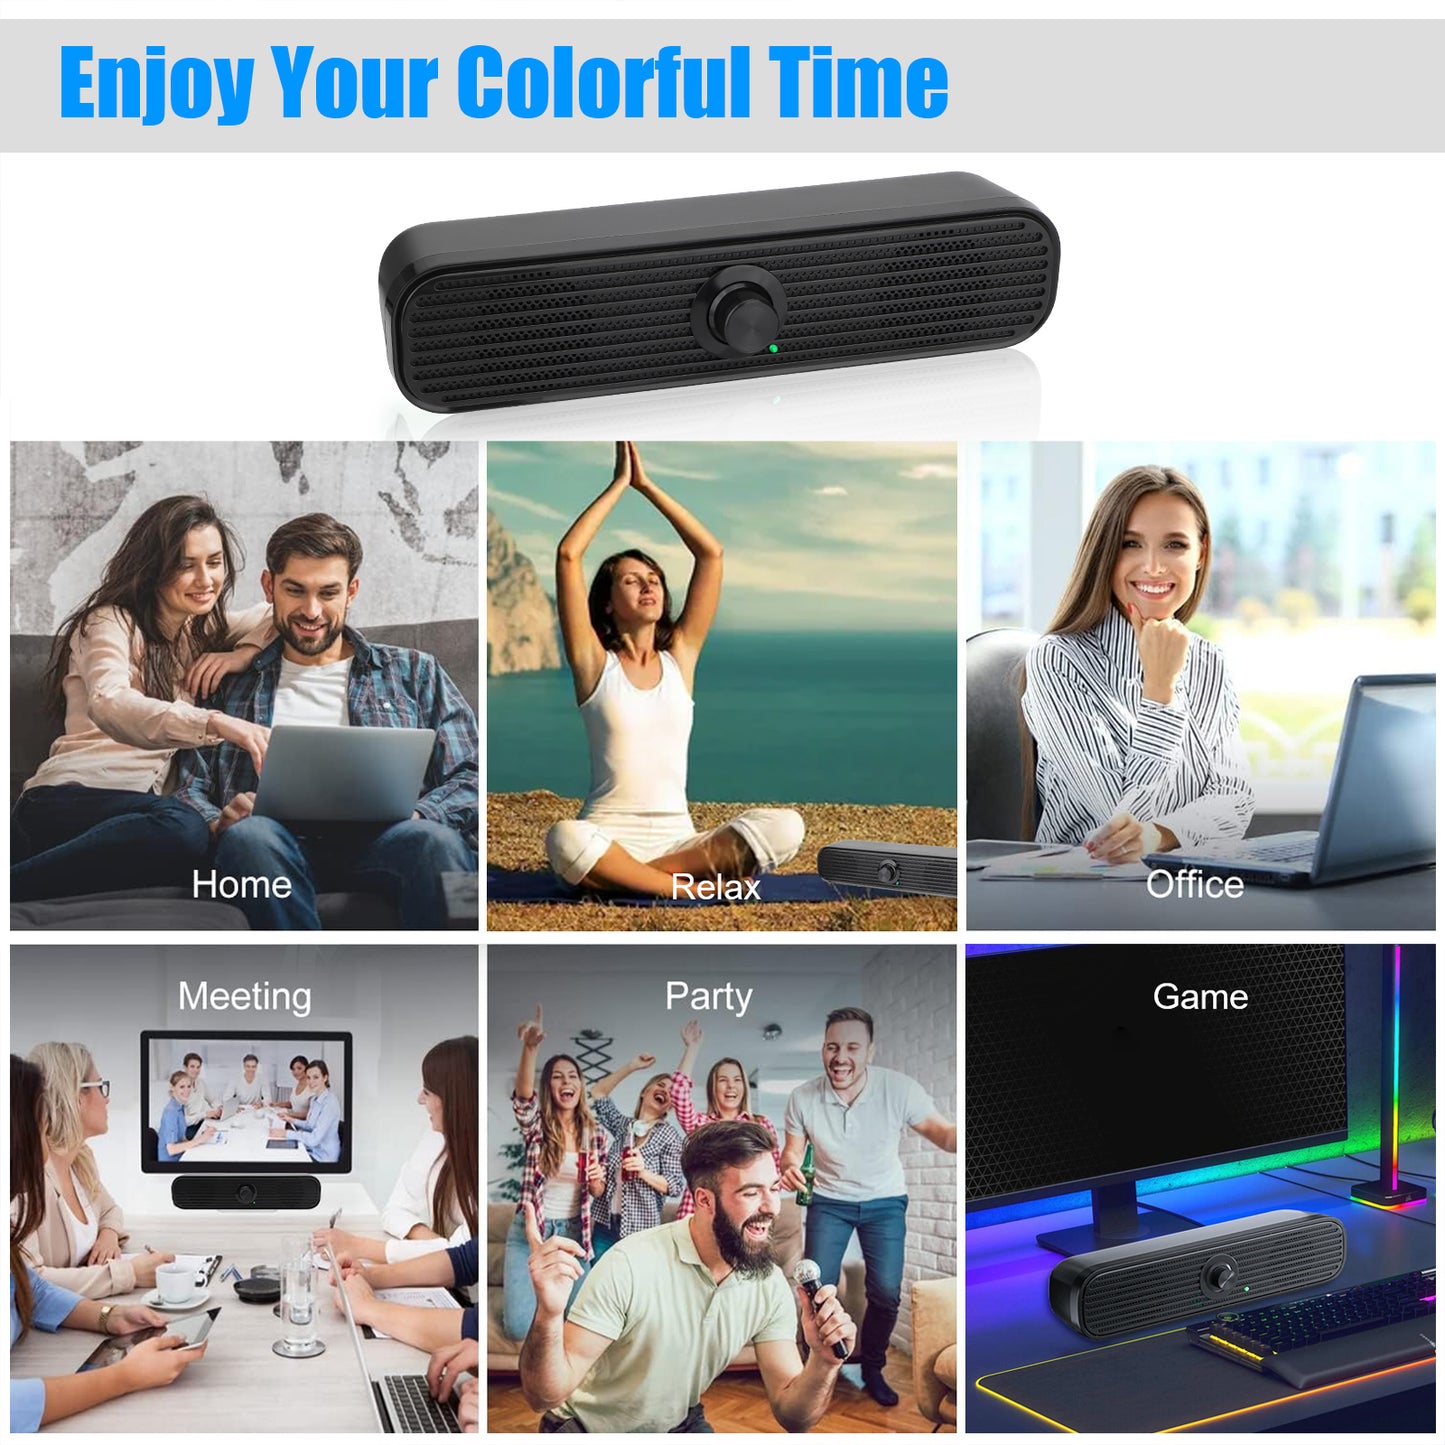 Long Stripes USB Wired Computer Speakers - Big Dial Volume Control, Plug and Play, Stylish Slim Design, for PC Desktop Laptop